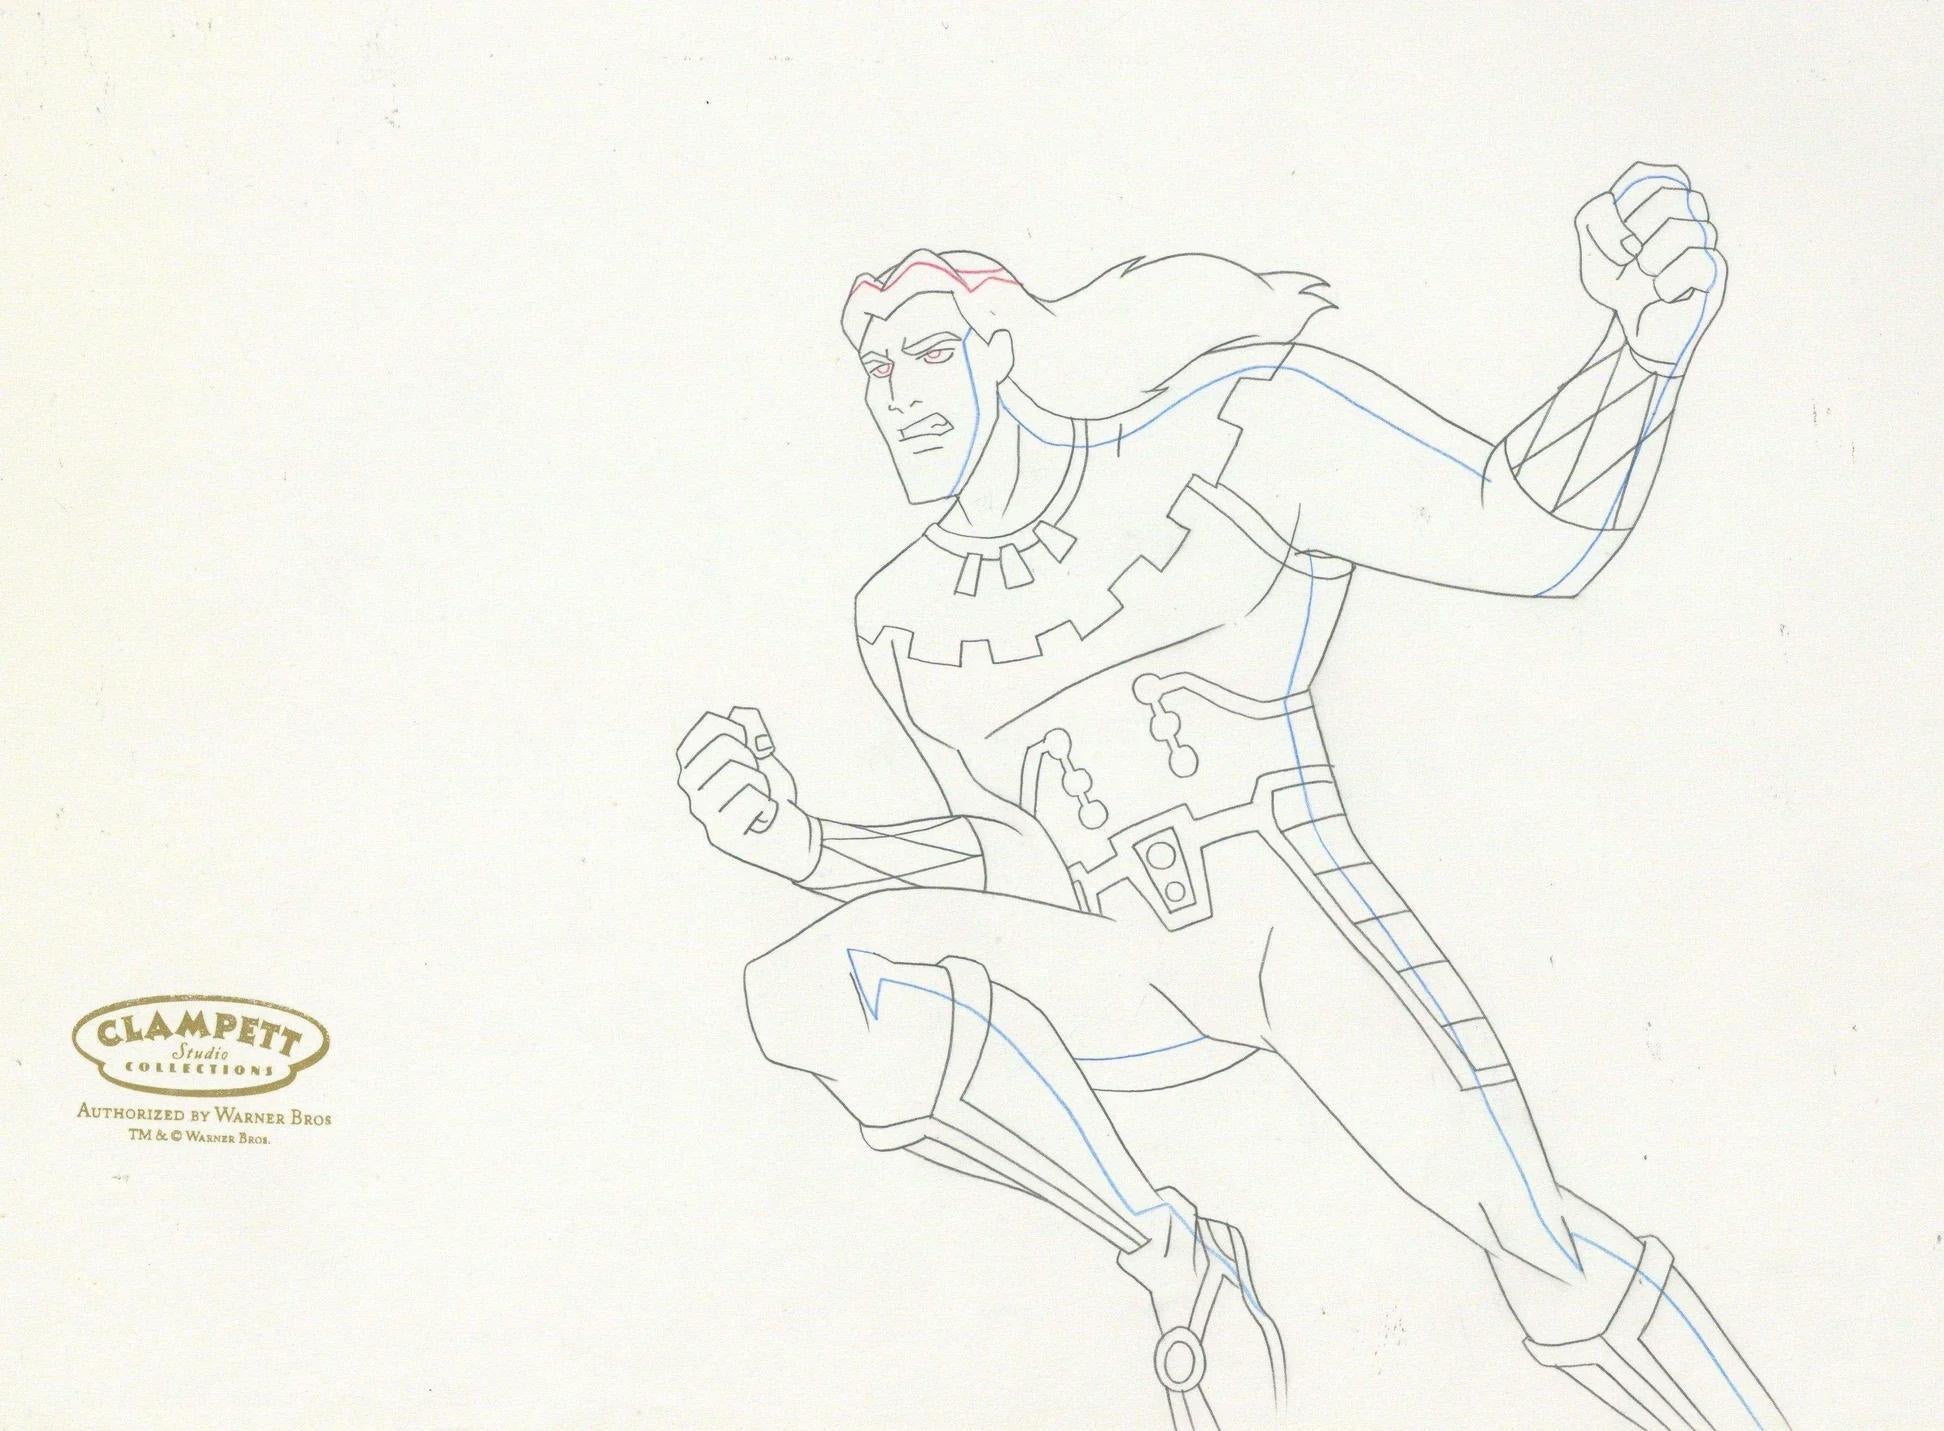 Justice League Unlimited Original Production Drawing: Long Shadow - Art by DC Comics Studio Artists